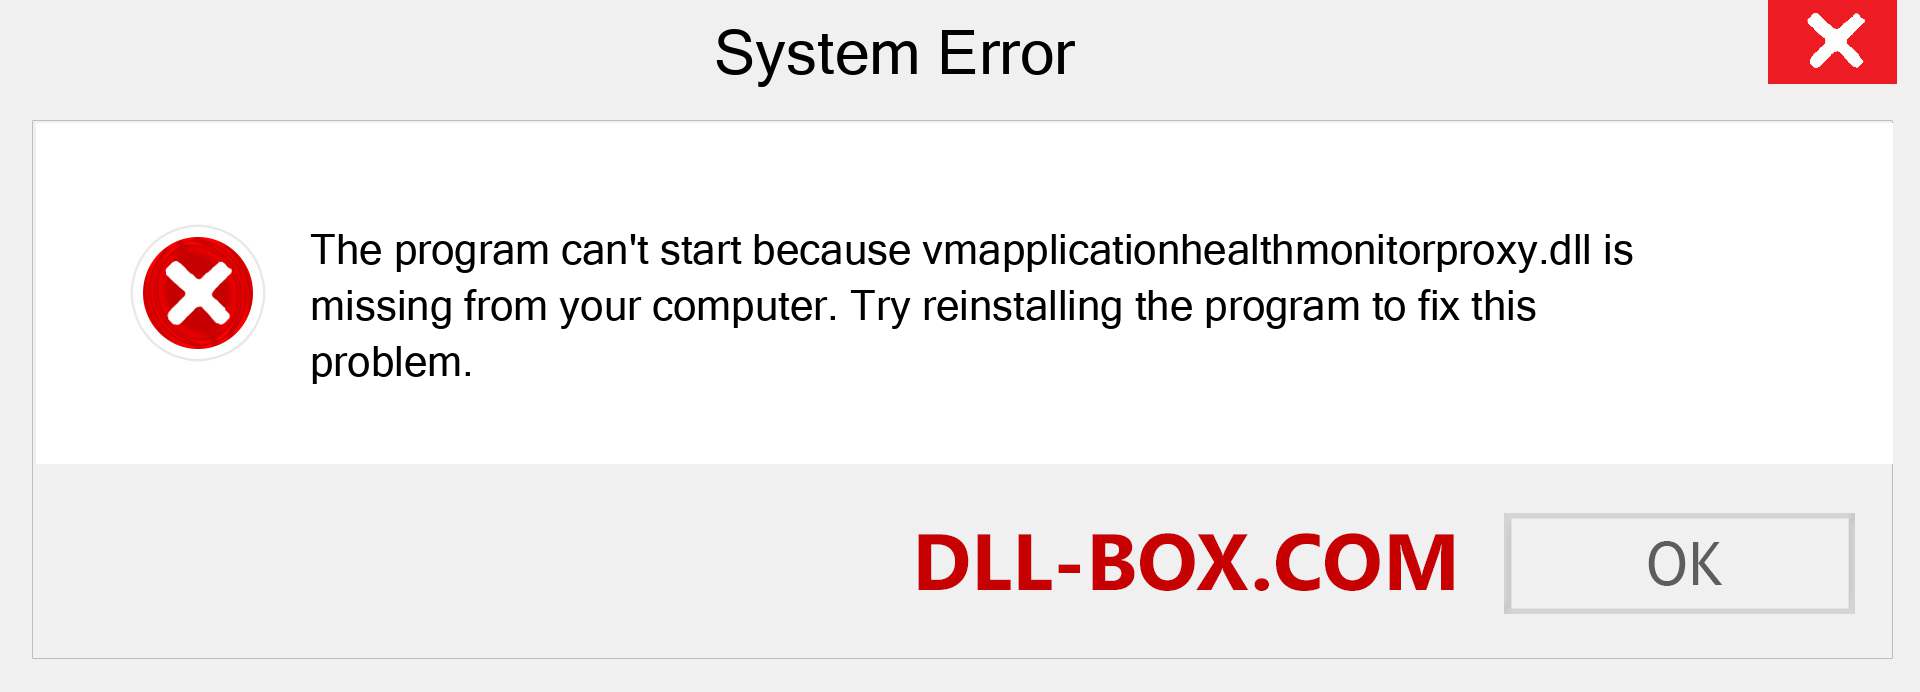  vmapplicationhealthmonitorproxy.dll file is missing?. Download for Windows 7, 8, 10 - Fix  vmapplicationhealthmonitorproxy dll Missing Error on Windows, photos, images